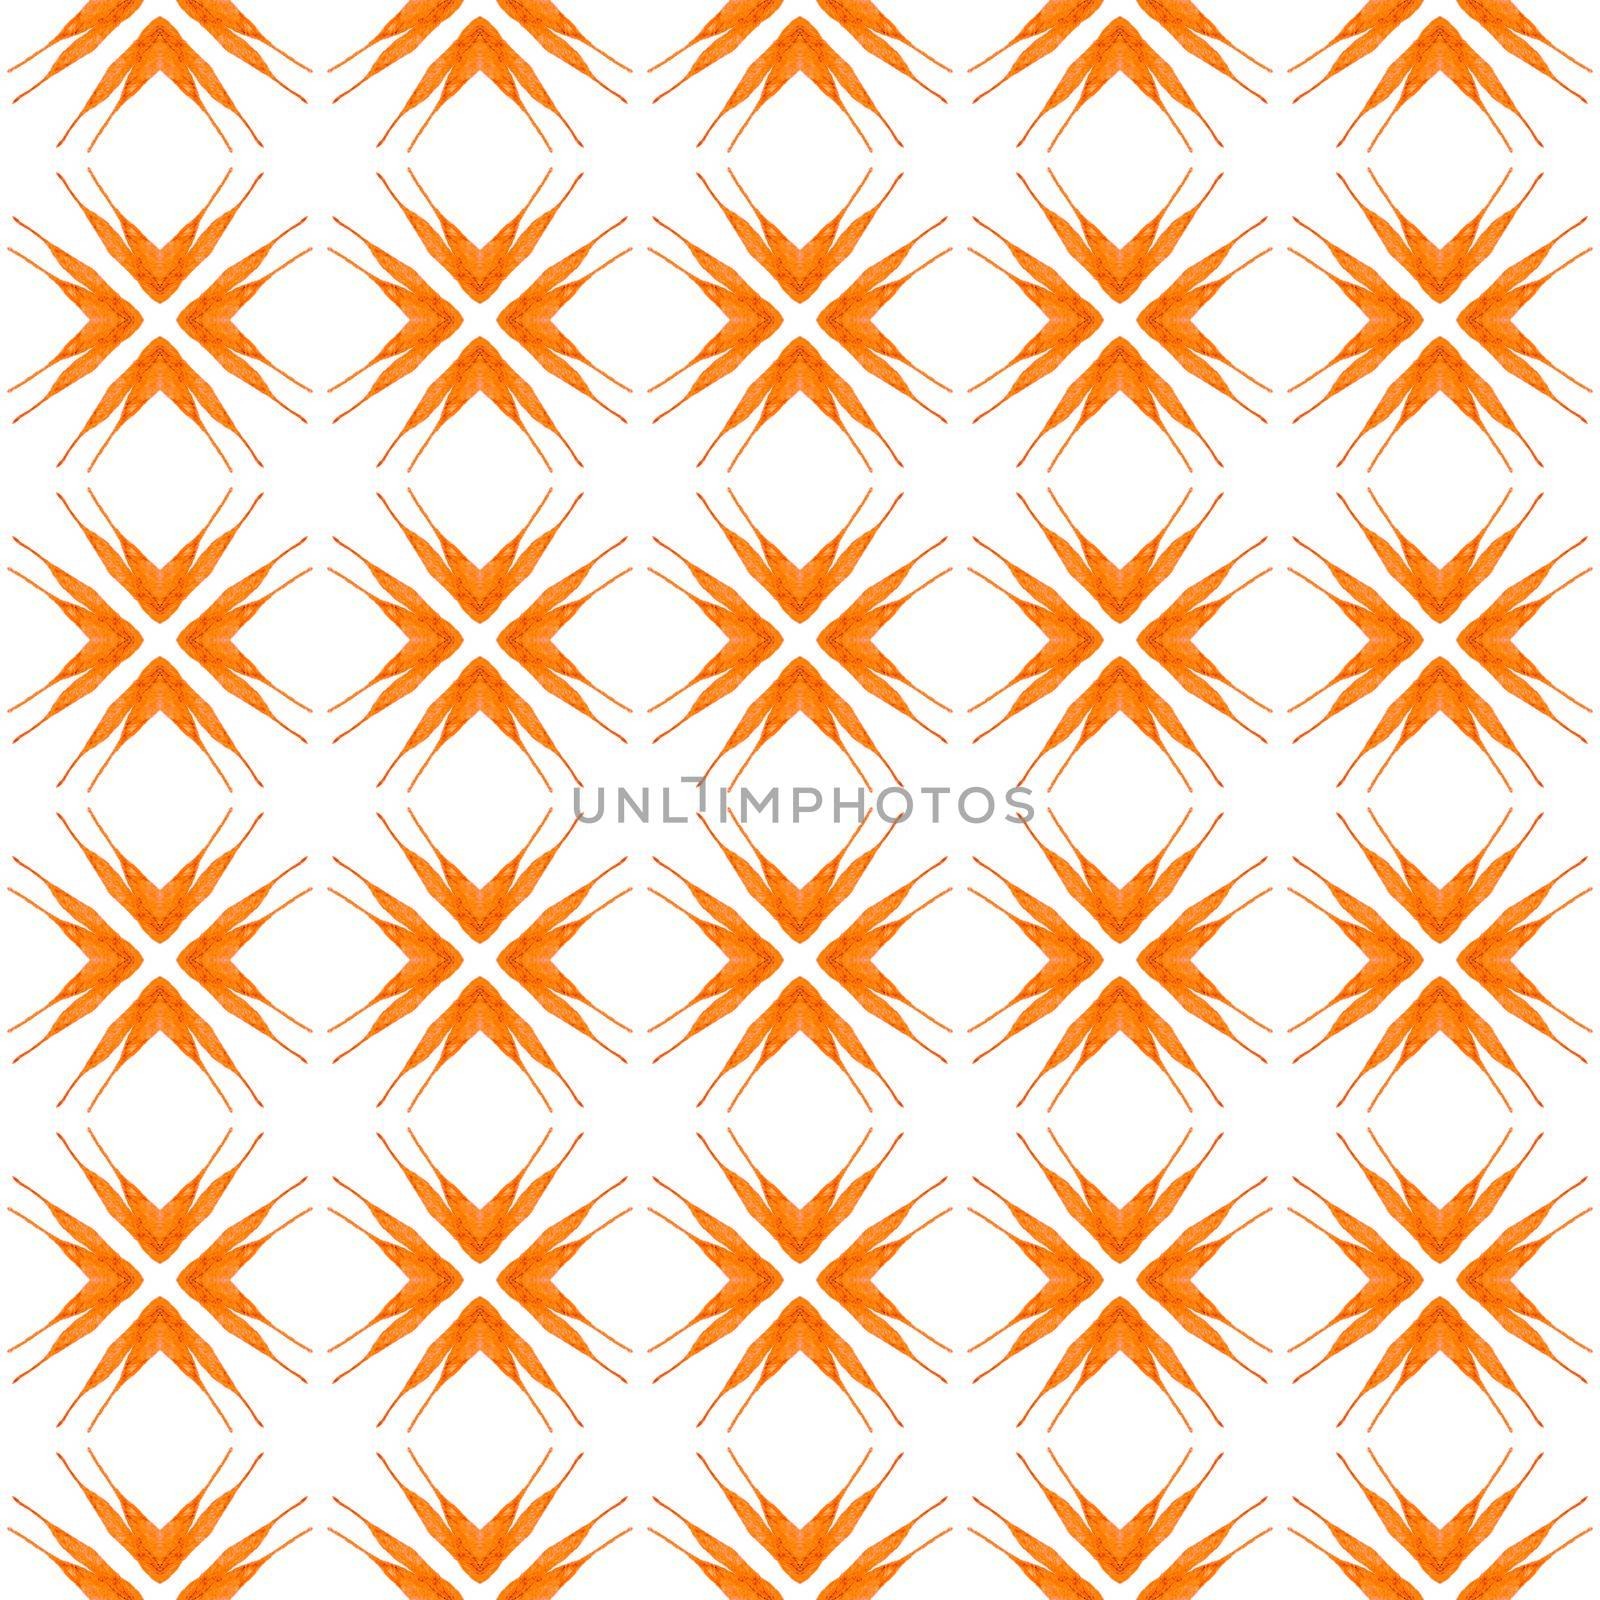 Textile ready decent print, swimwear fabric, wallpaper, wrapping. Orange unusual boho chic summer design. Watercolor summer ethnic border pattern. Ethnic hand painted pattern.